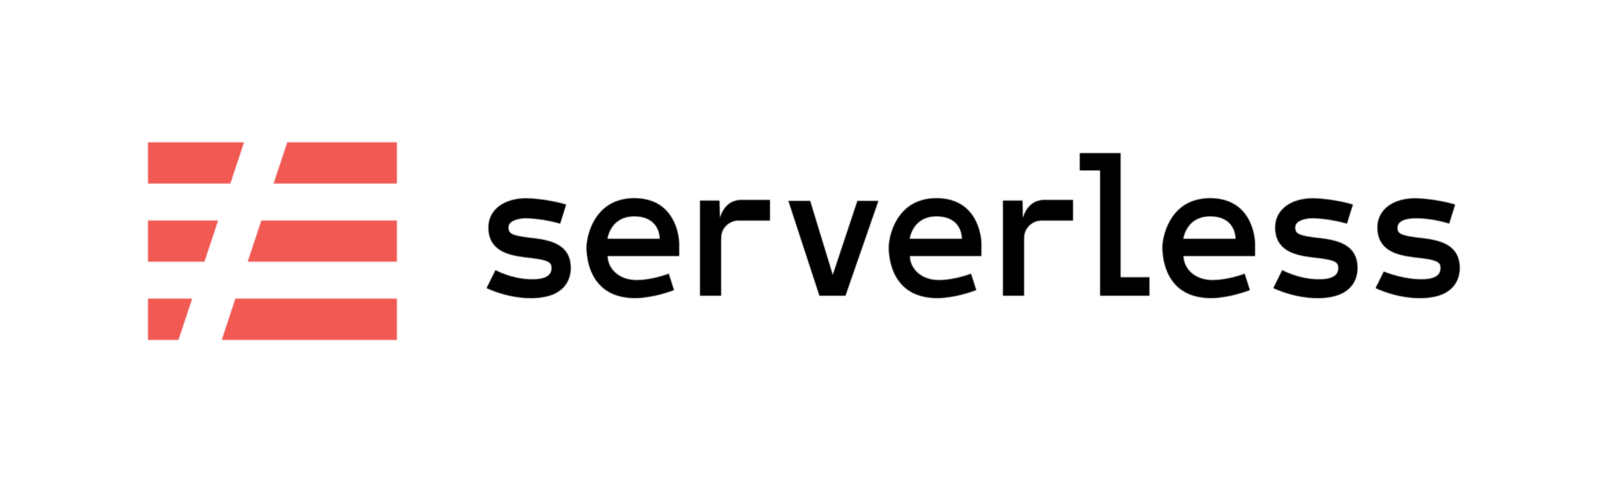 Keeping your serverless project size nice and clean